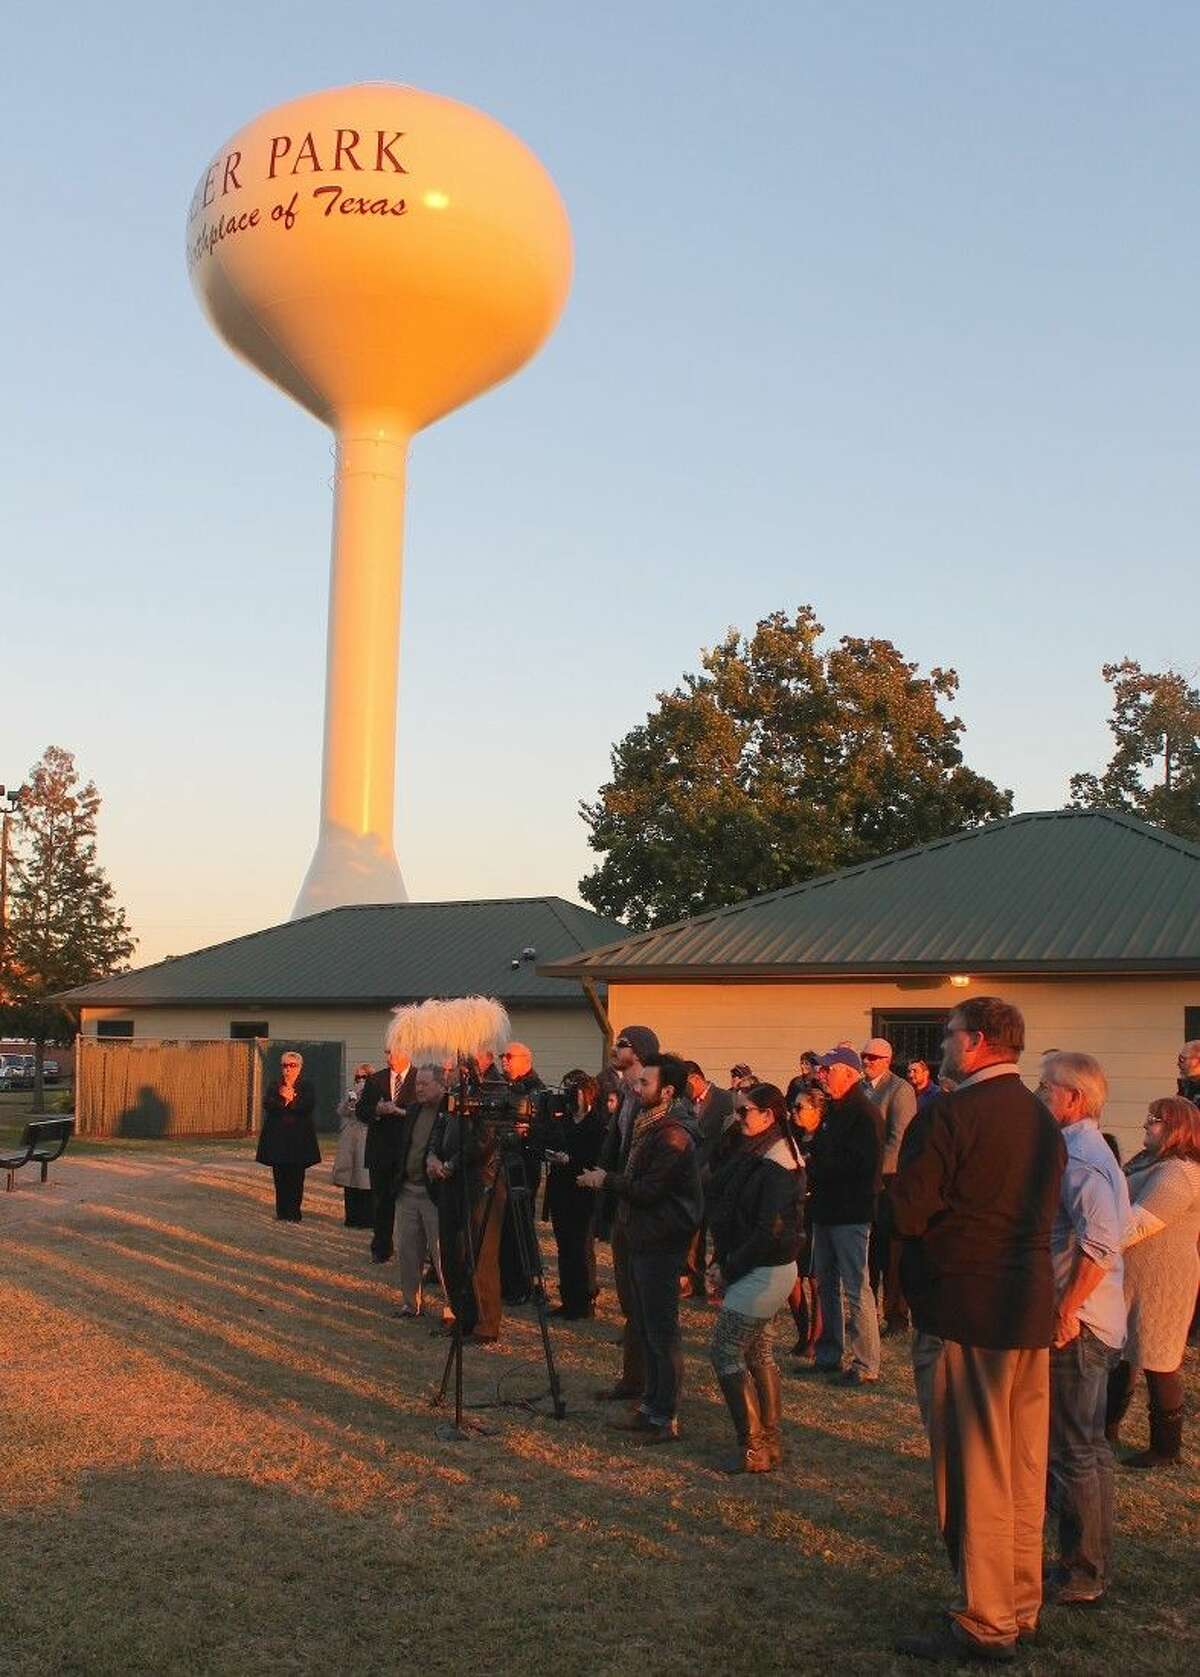 City representatives and residents listen in the shadow of the Deer Park water tower.